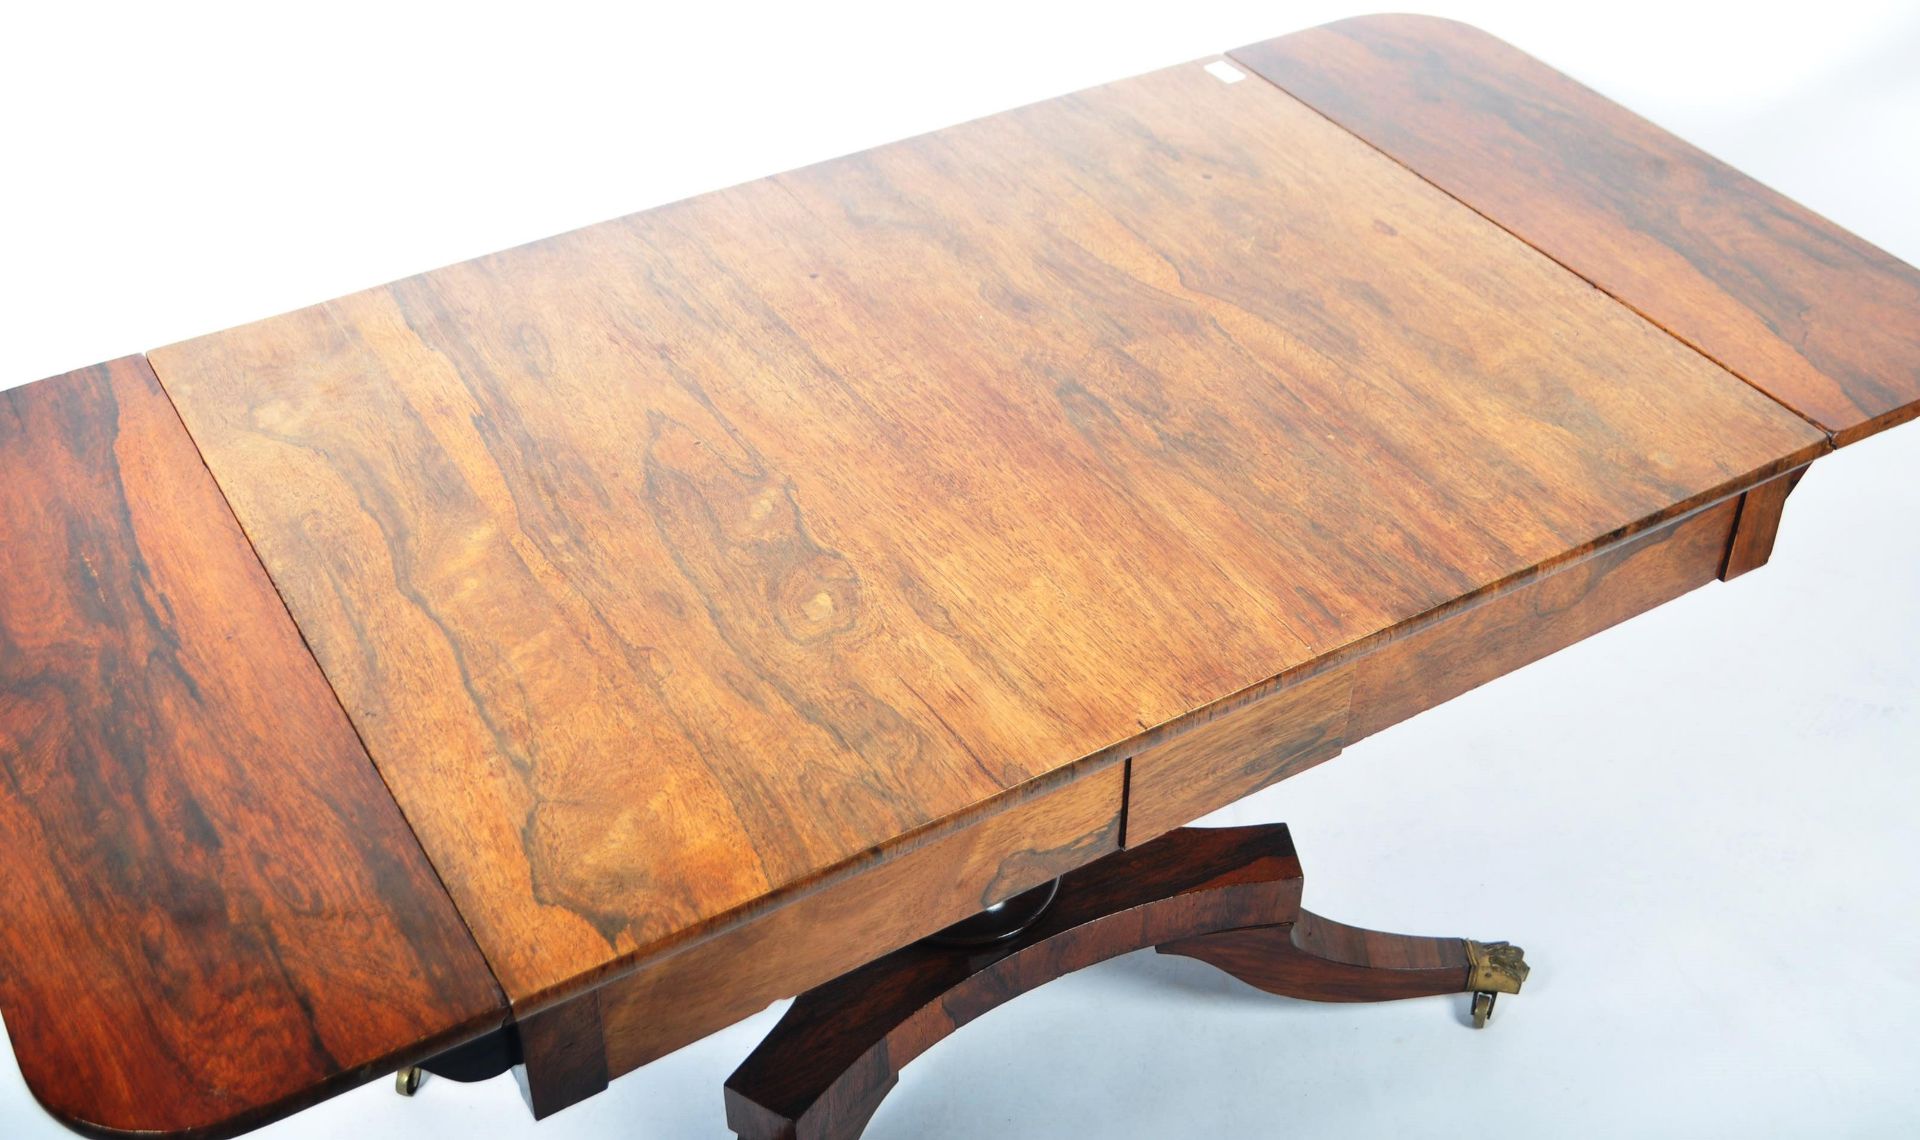 19TH CENTURY REGENCY PERIOD ROSEWOOD SOFA TABLE - Image 4 of 8